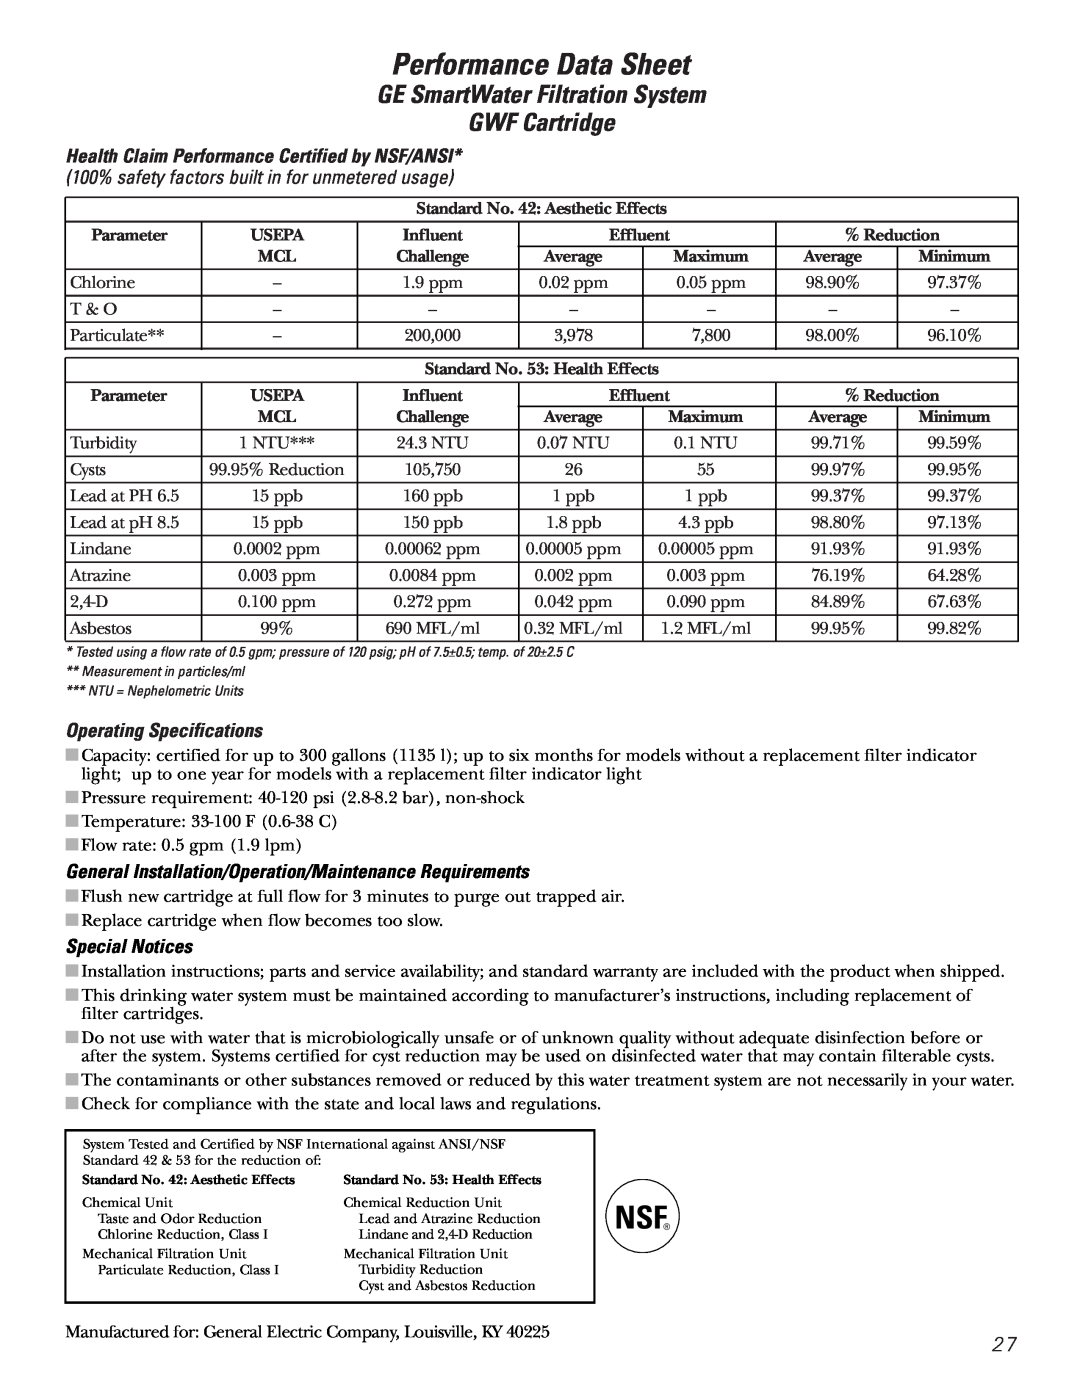 GE 197D3351P003 Performance Data Sheet, GE SmartWater Filtration System GWF Cartridge, Operating Specifications 